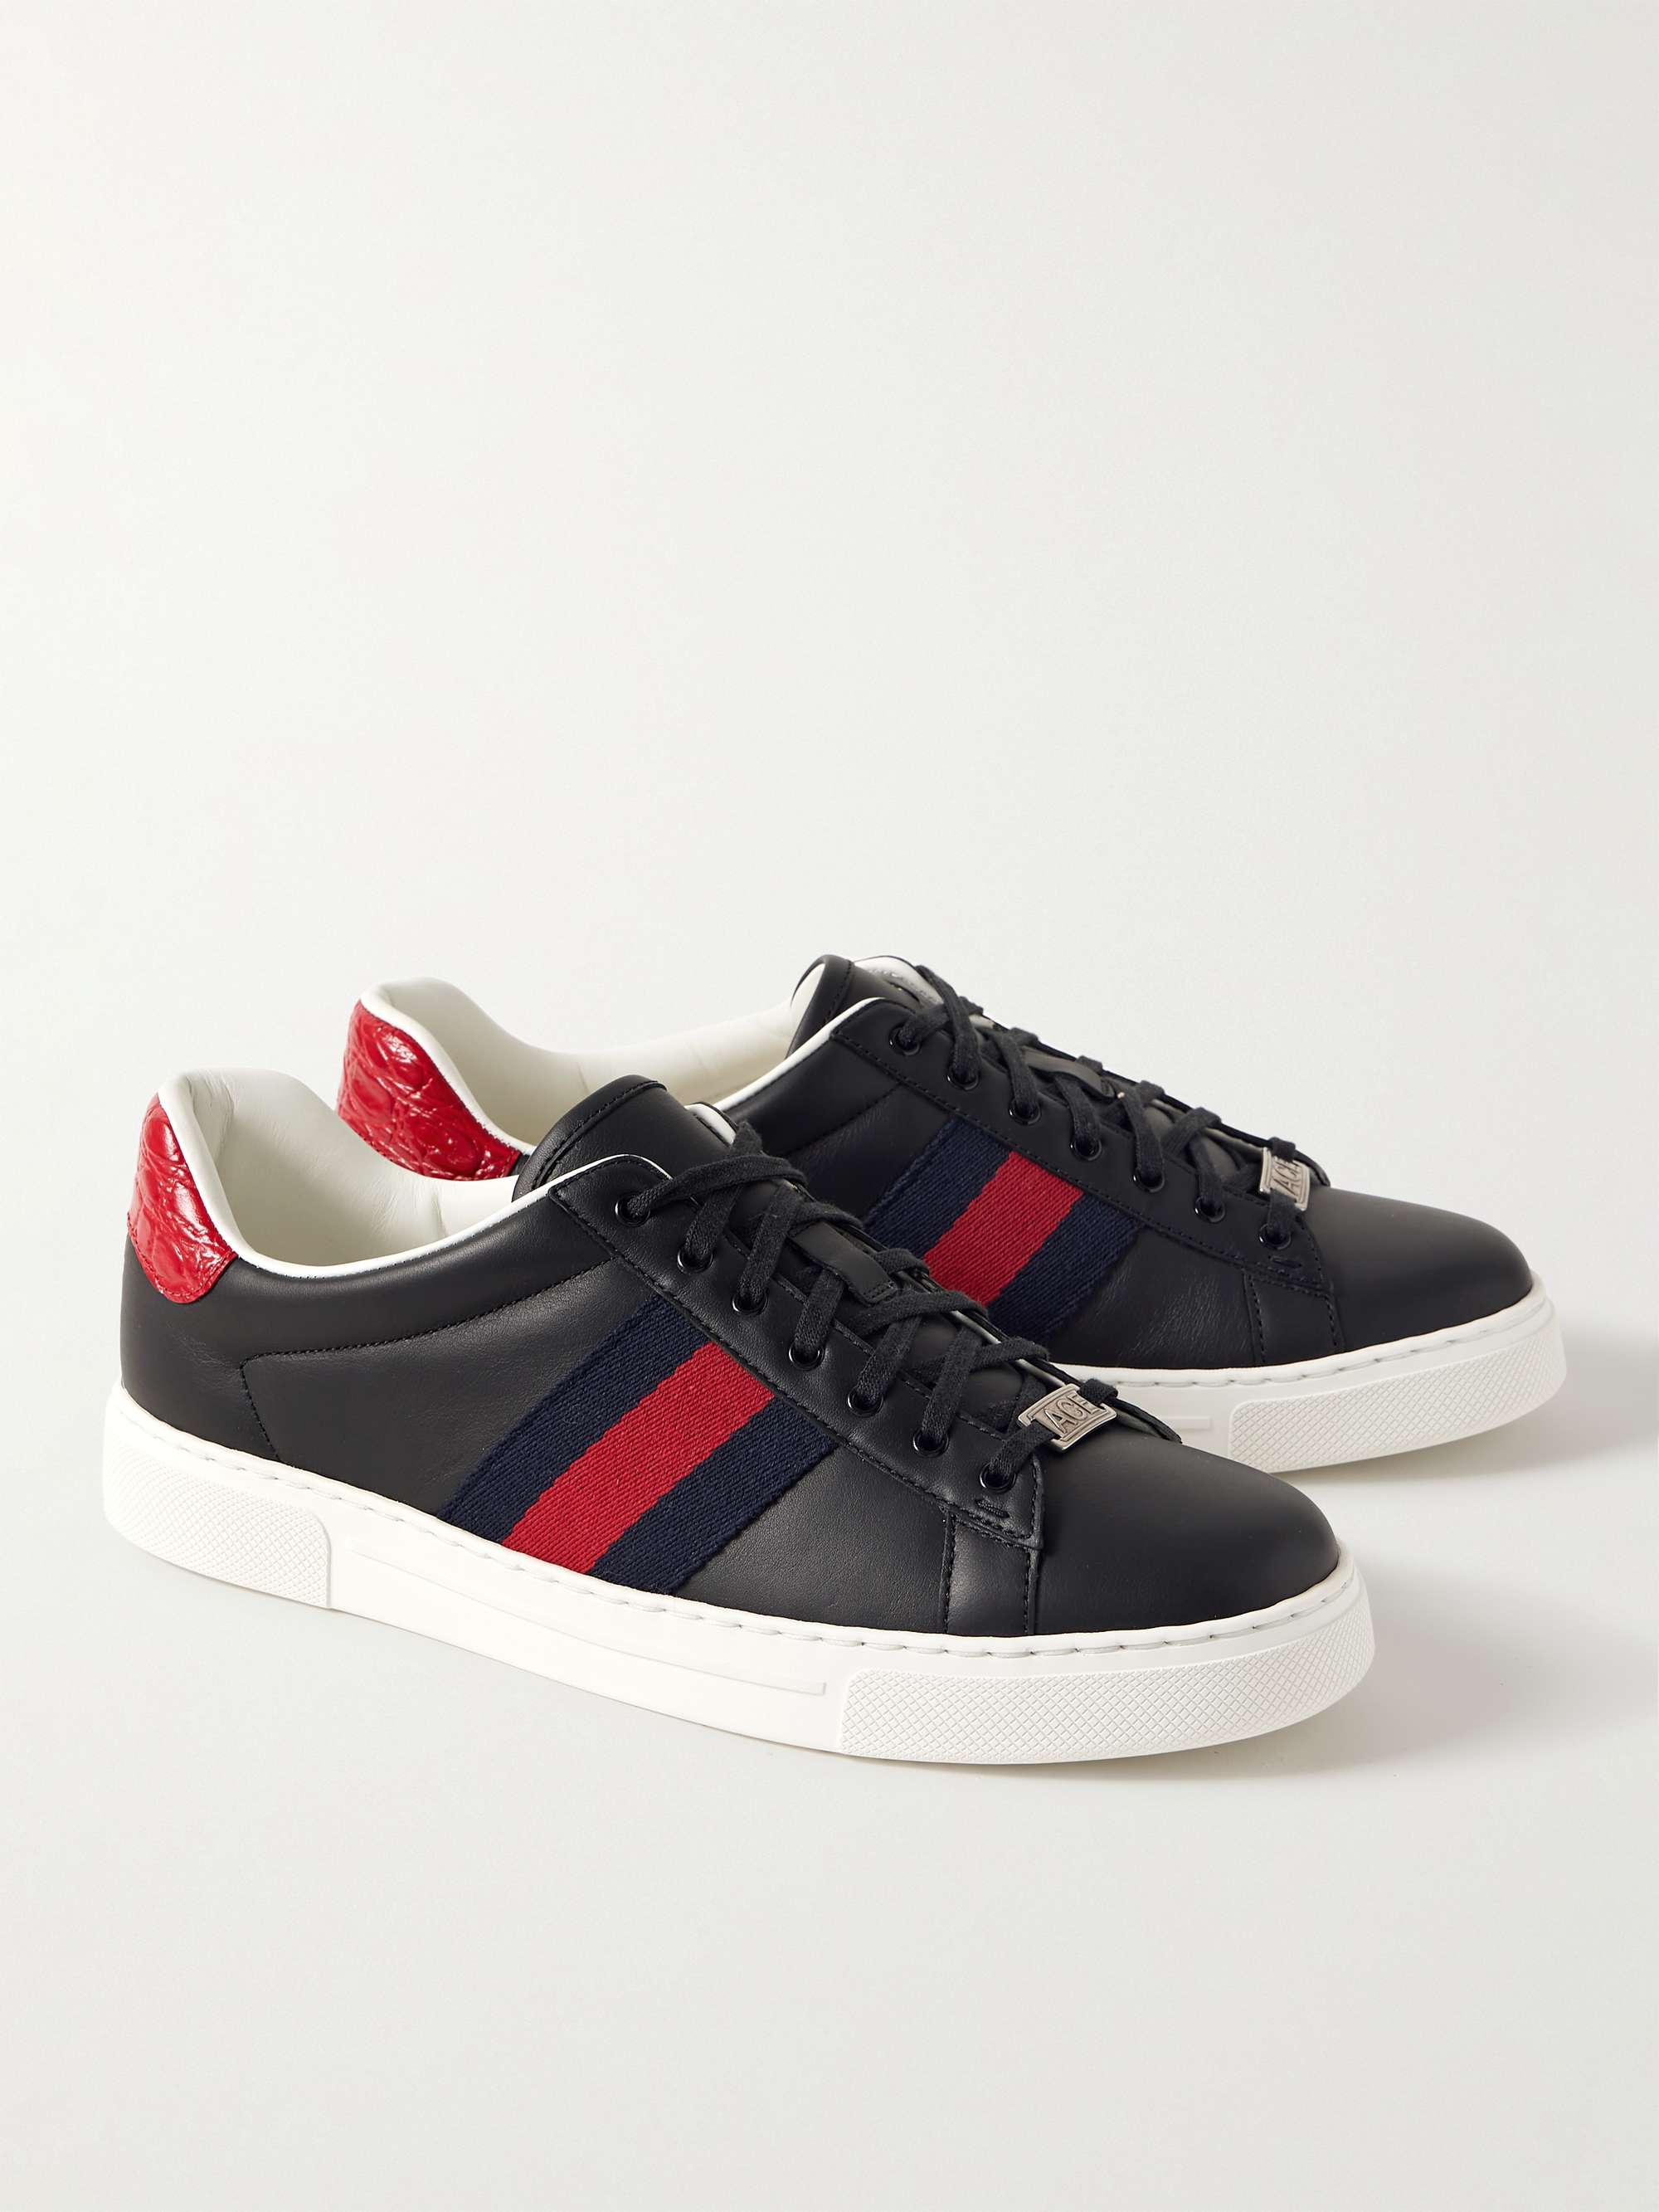 GUCCI Ace Webbing-Trimmed Leather Sneakers for Men | MR PORTER